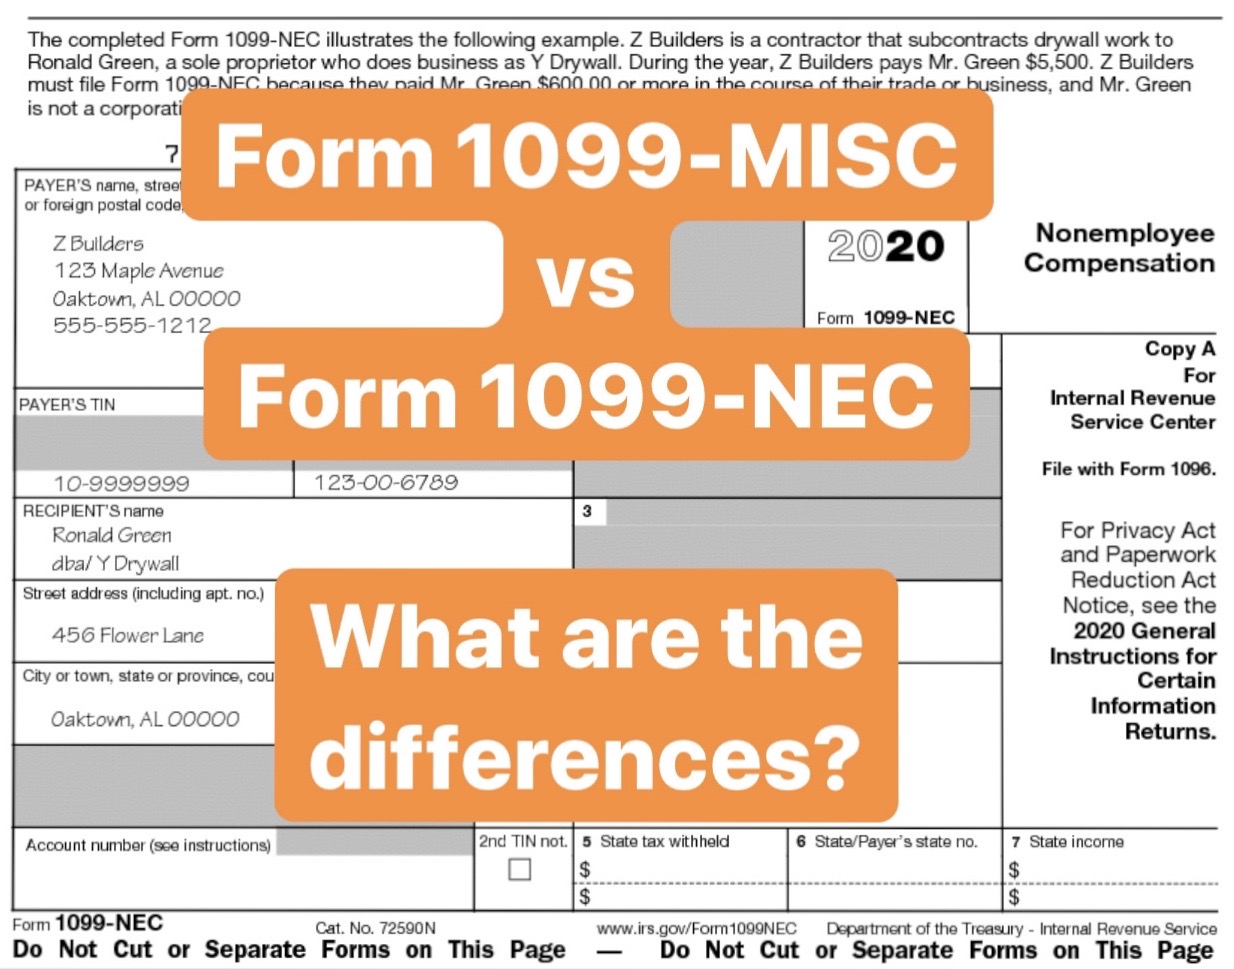 form-1099-misc-vs-form-1099-nec-how-are-they-different